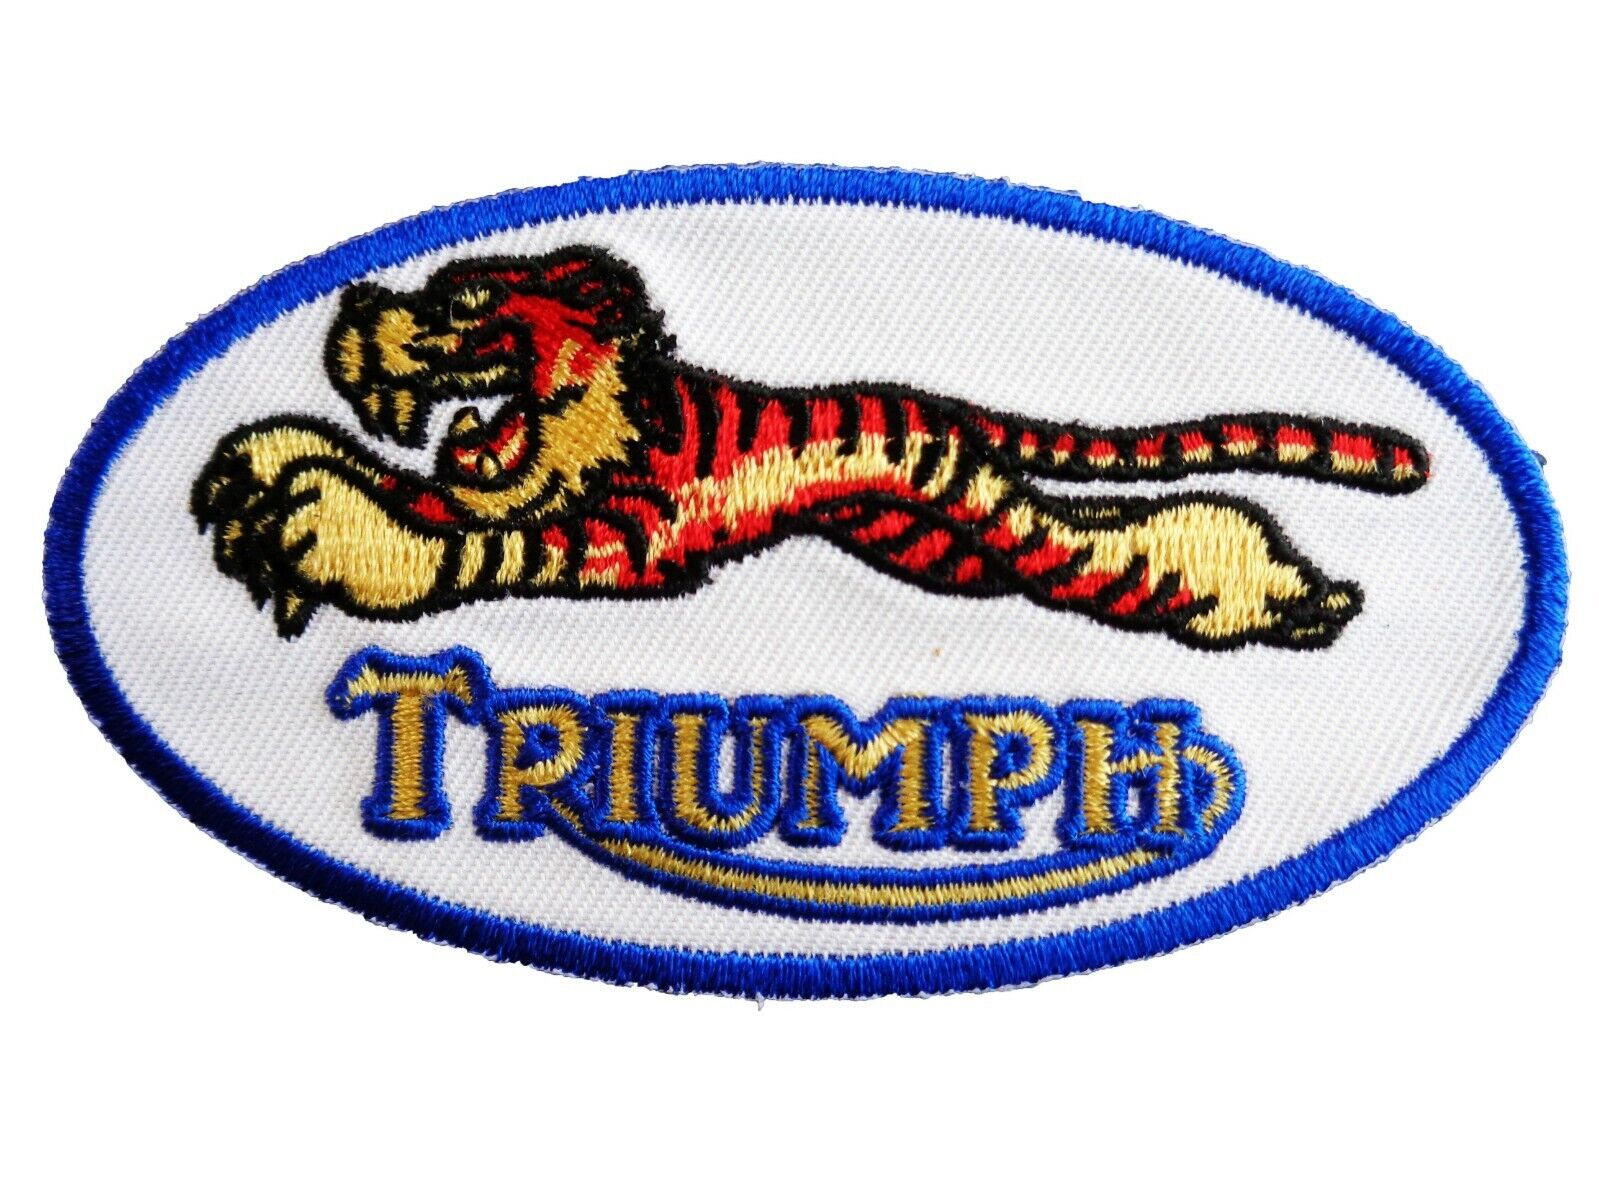 Triumph tiger Motorcycles Racing Embroidered iron on Sew on 4 inch Biker Patch